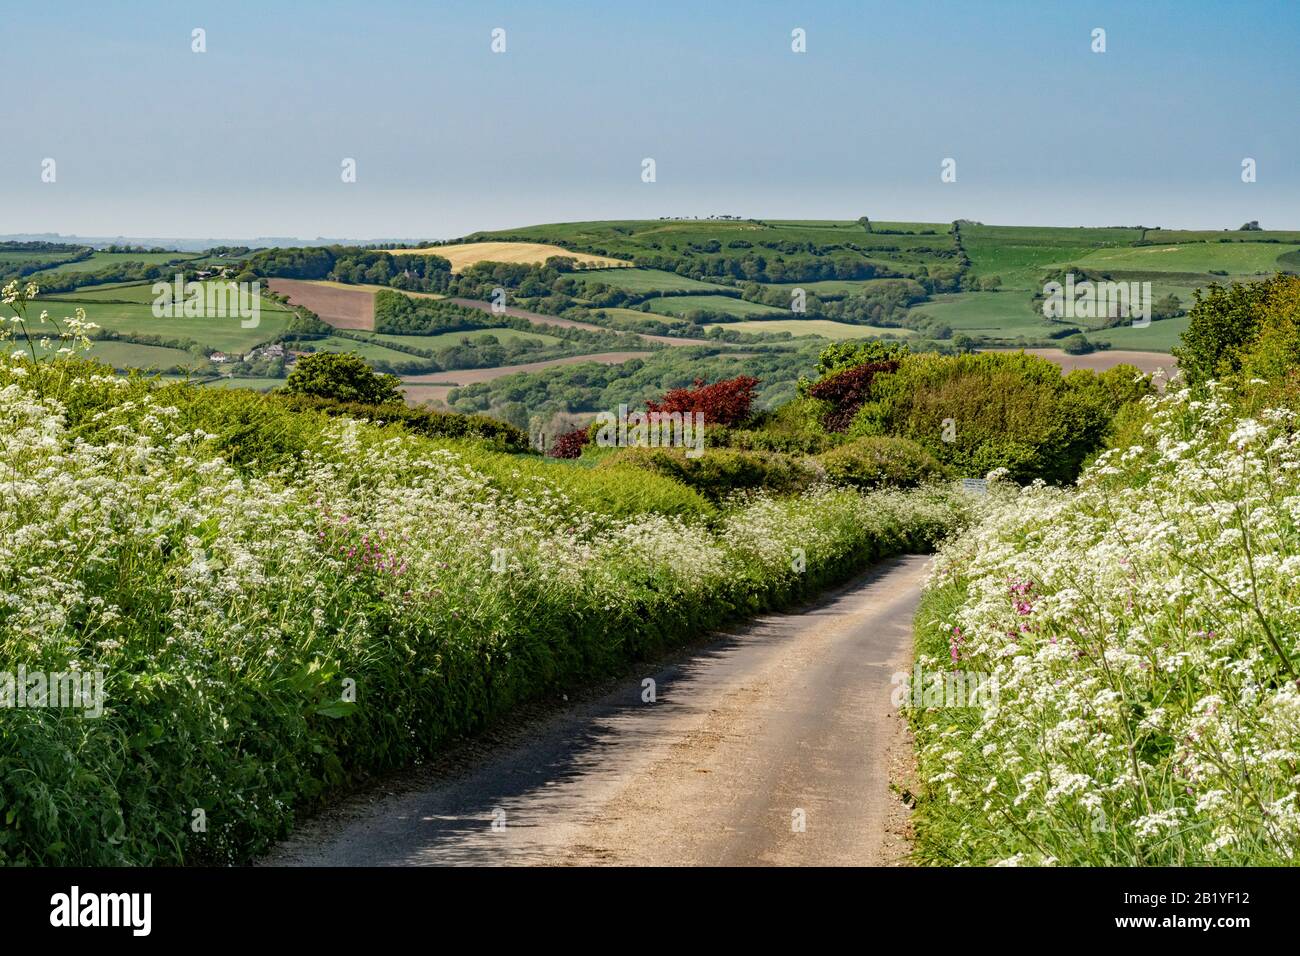 View looking north down a country lane in springtime bordered by wildflowers, Clay Lane, near Puncknowle, on the Jurassic Coast, Dorset, England, UK Stock Photo